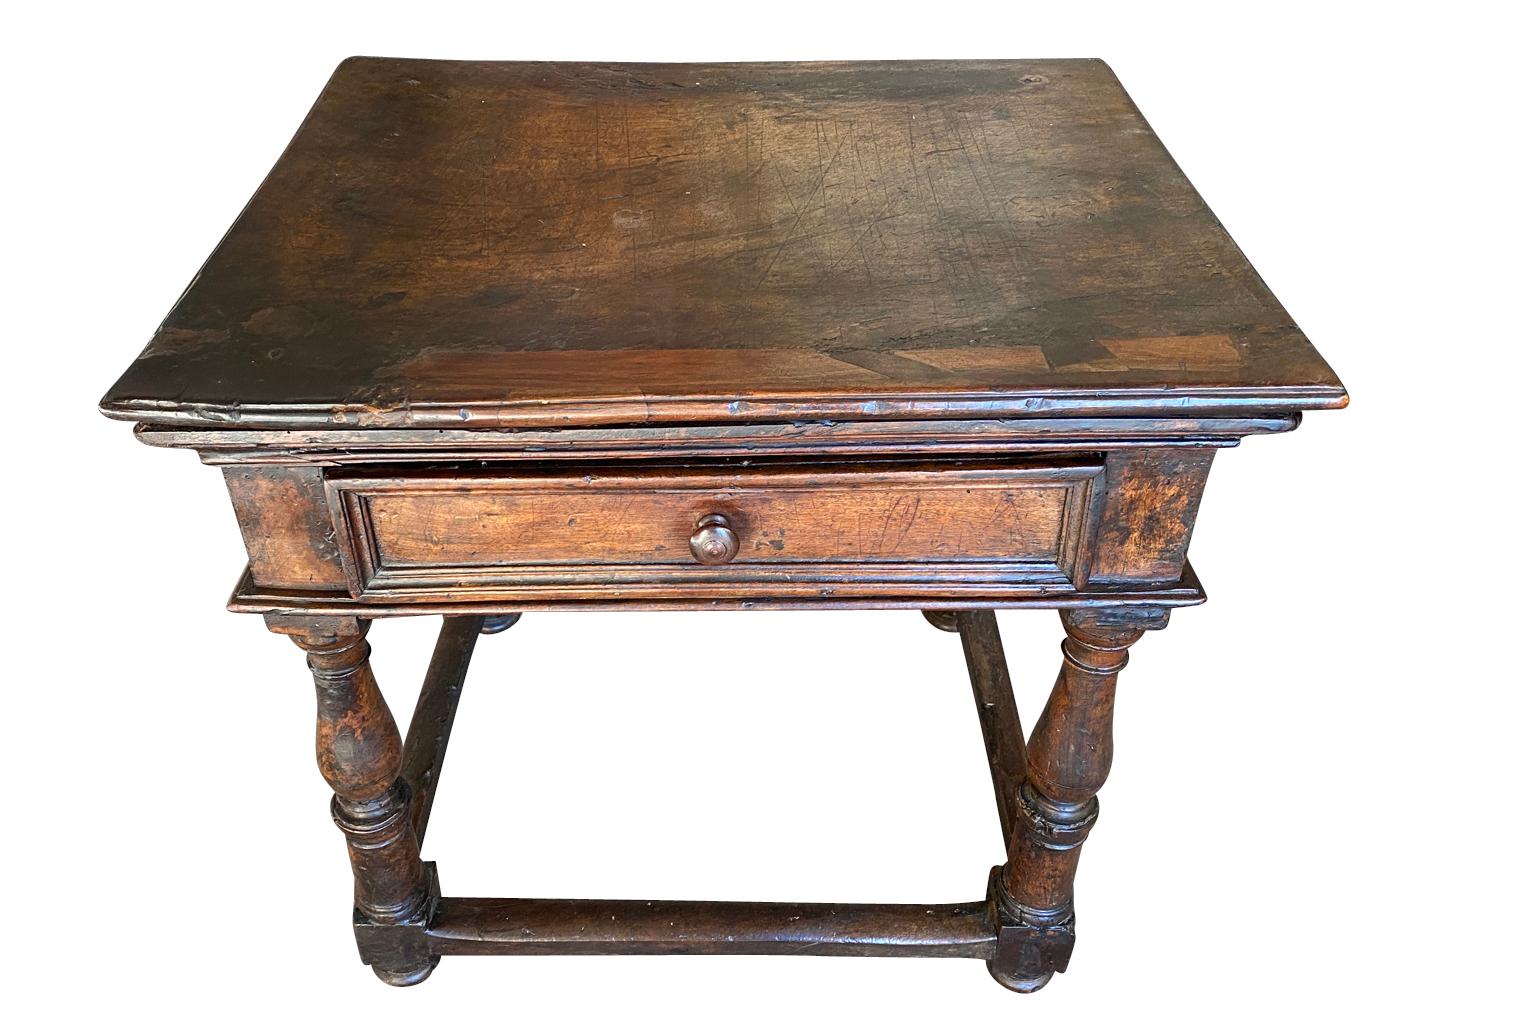 A very beautiful 18th century Side Table from Bologna, Italy. Soundly constructed from stunning walnut with a solid board top, single drawer and nicely turned legs. Gorgeous patina - warm and luminous.